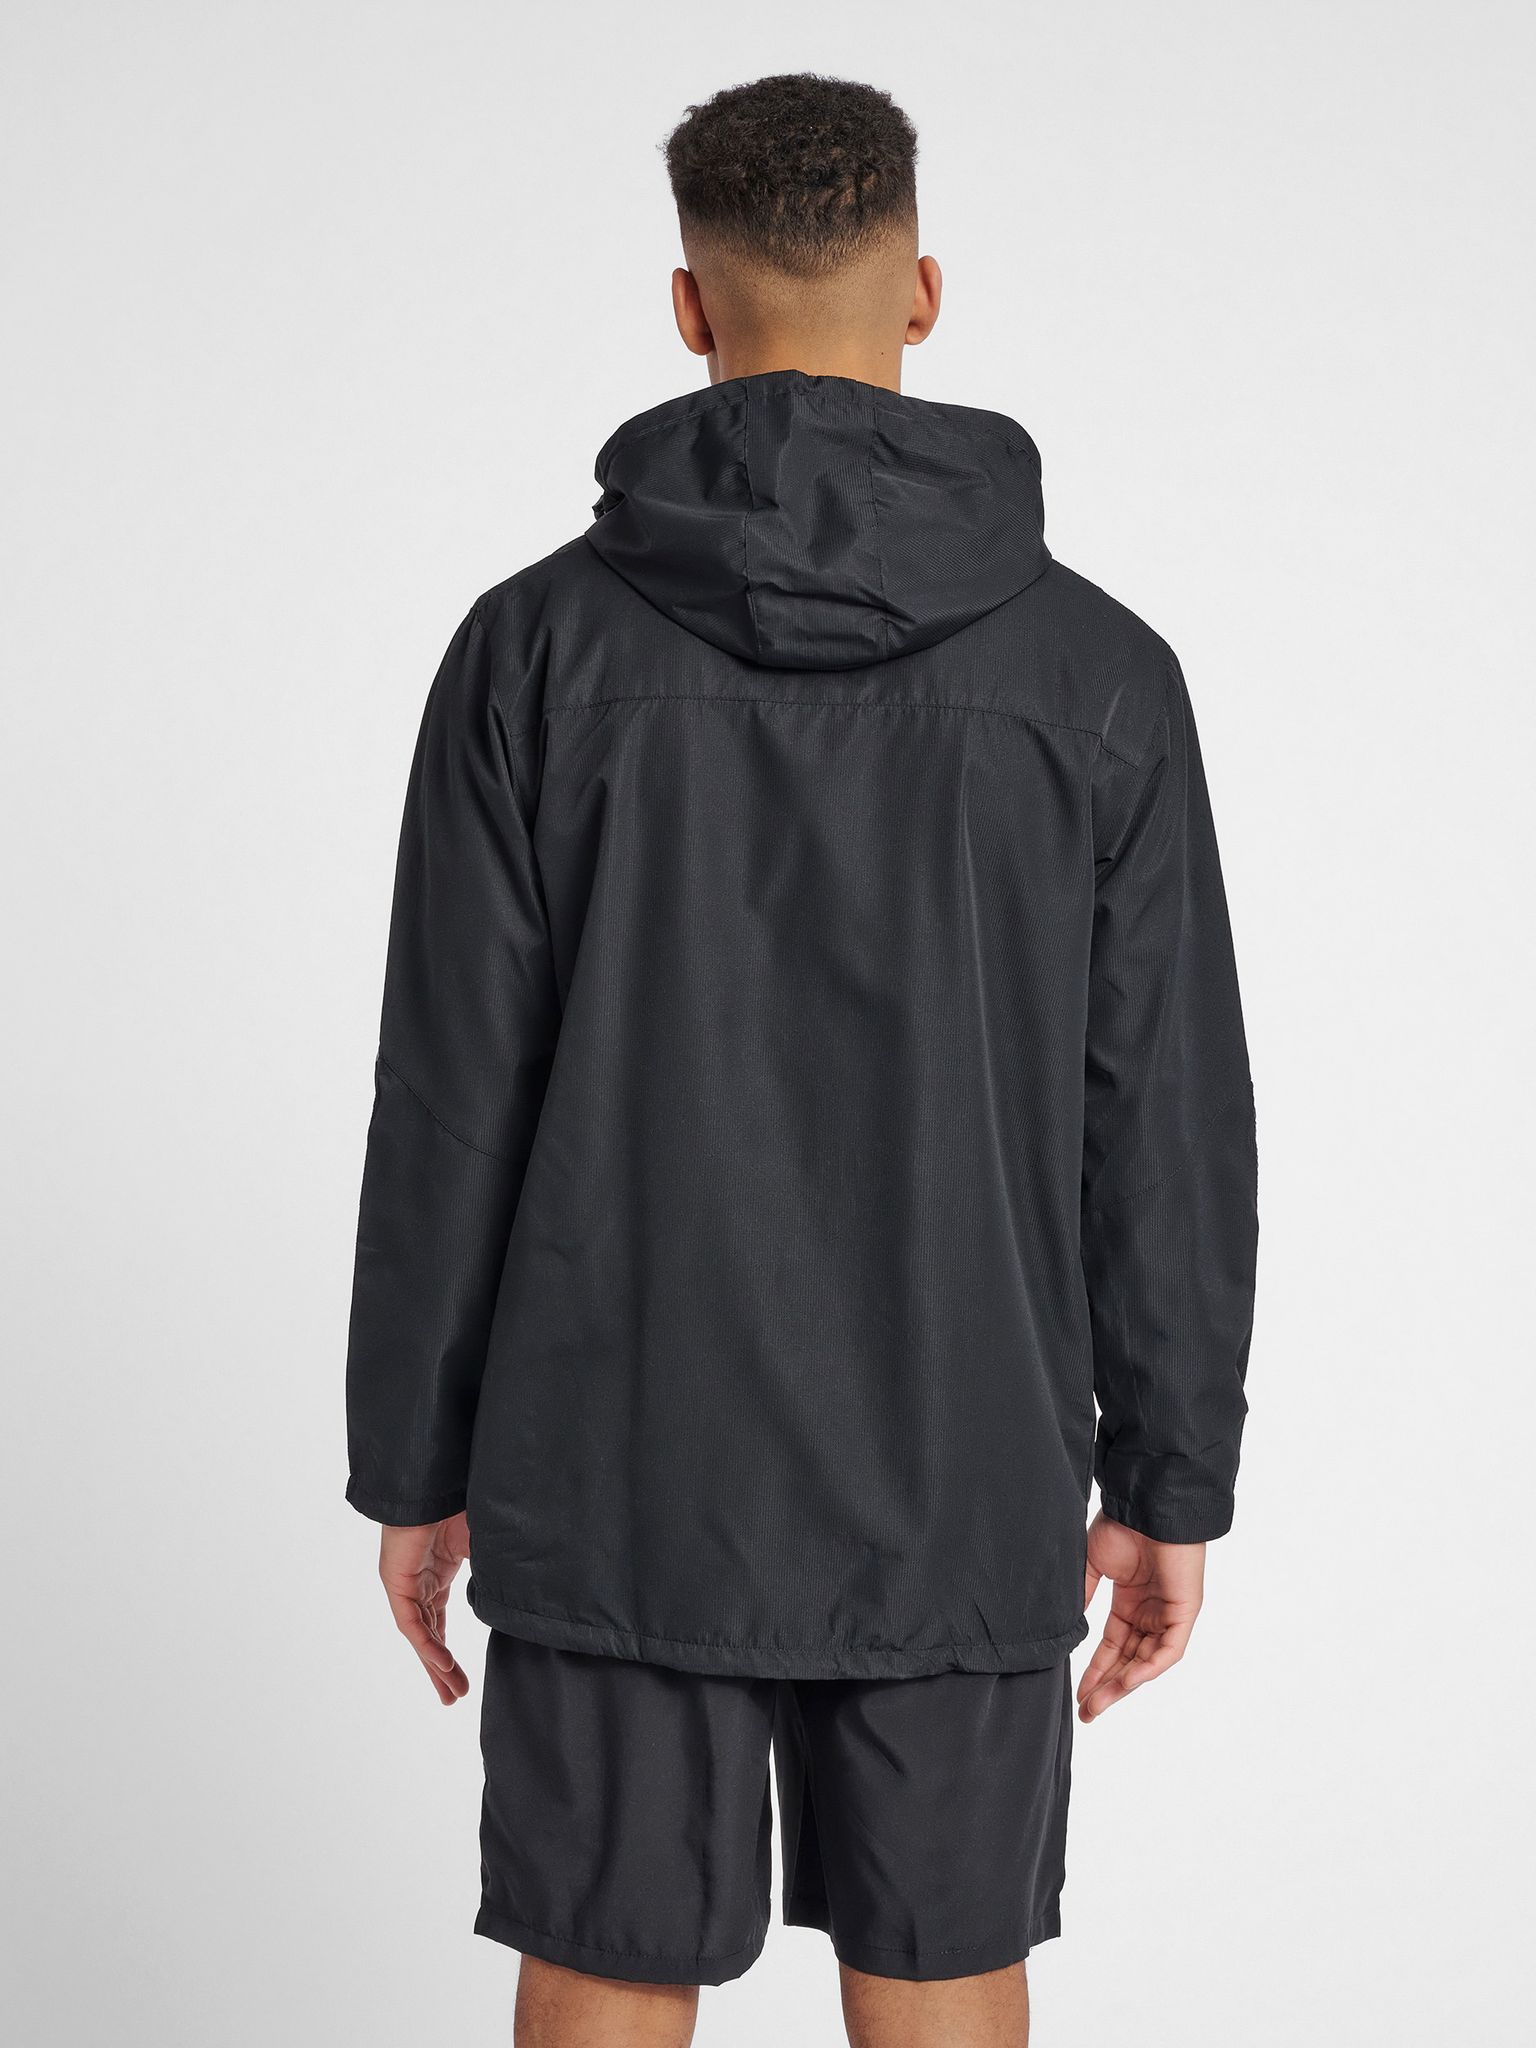 hmlAUTHENTIC ALL-WEATHER JACKET